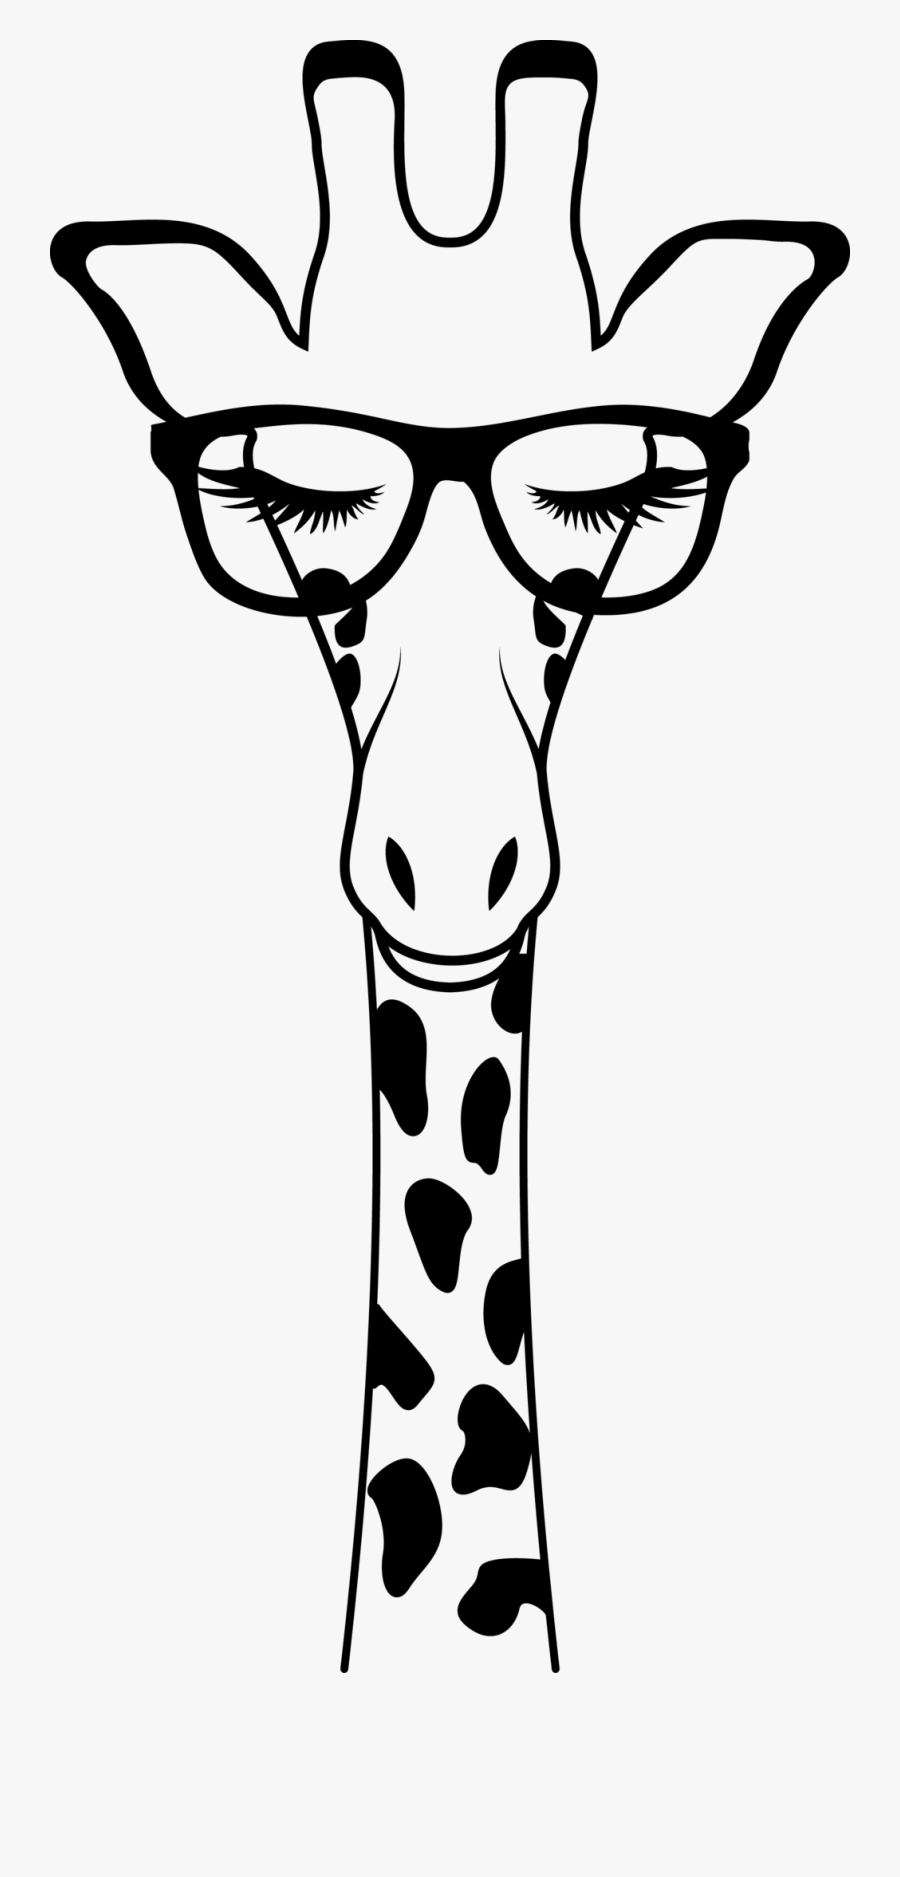 Download Giraffe Svg Free , Free Transparent Clipart - ClipartKey